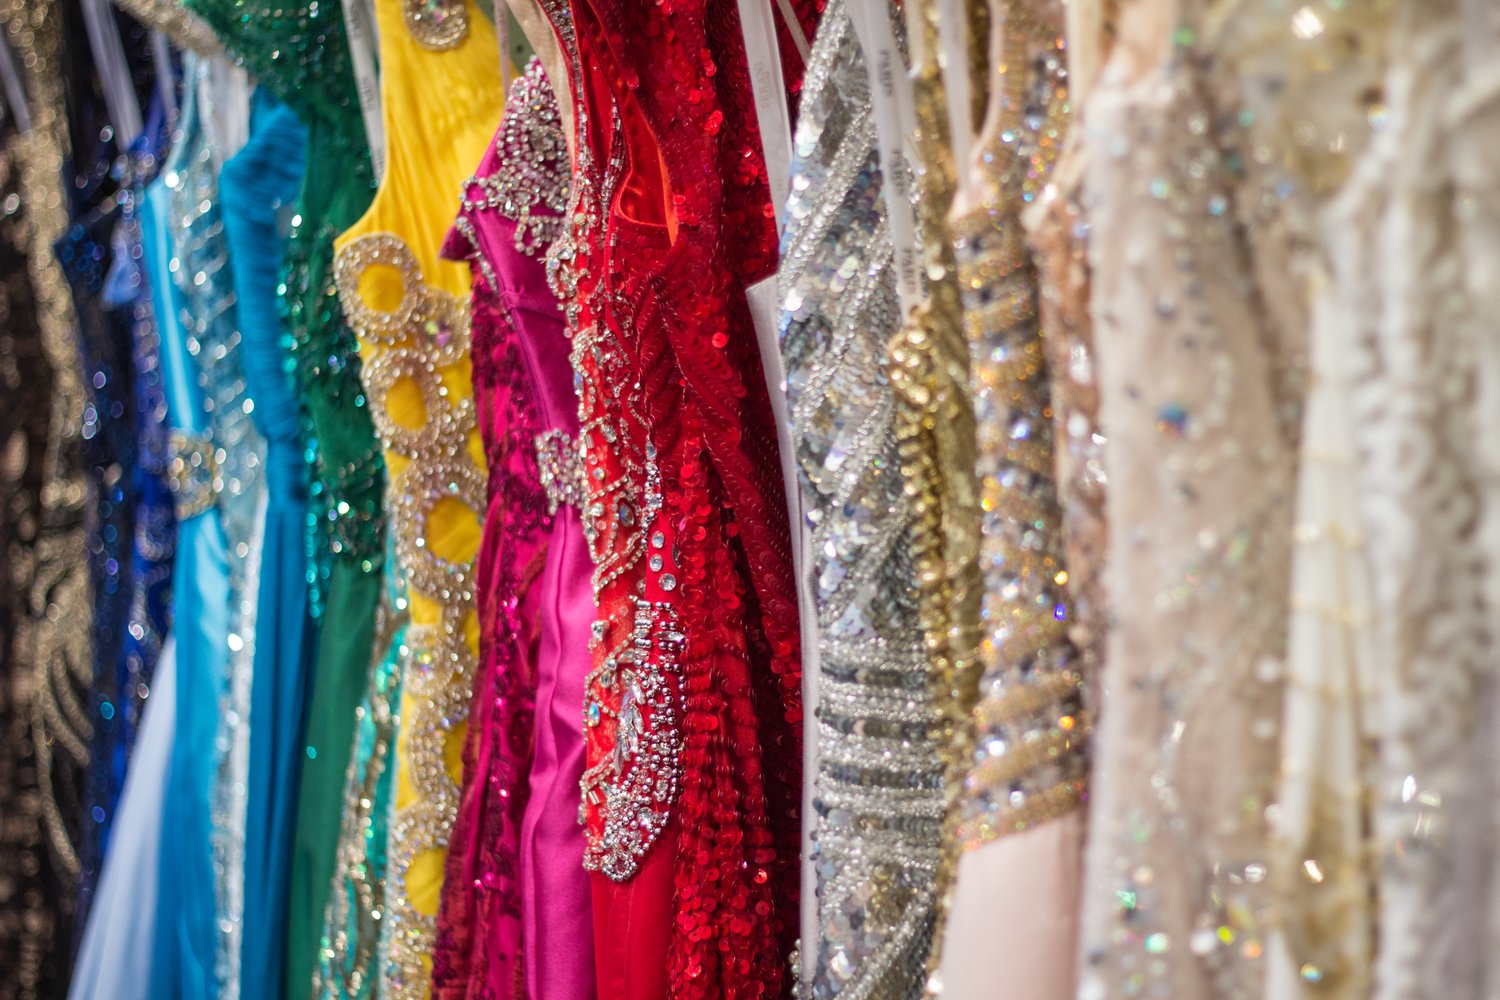 In store photo of prom dress selection, multiple circular racks of dresses.